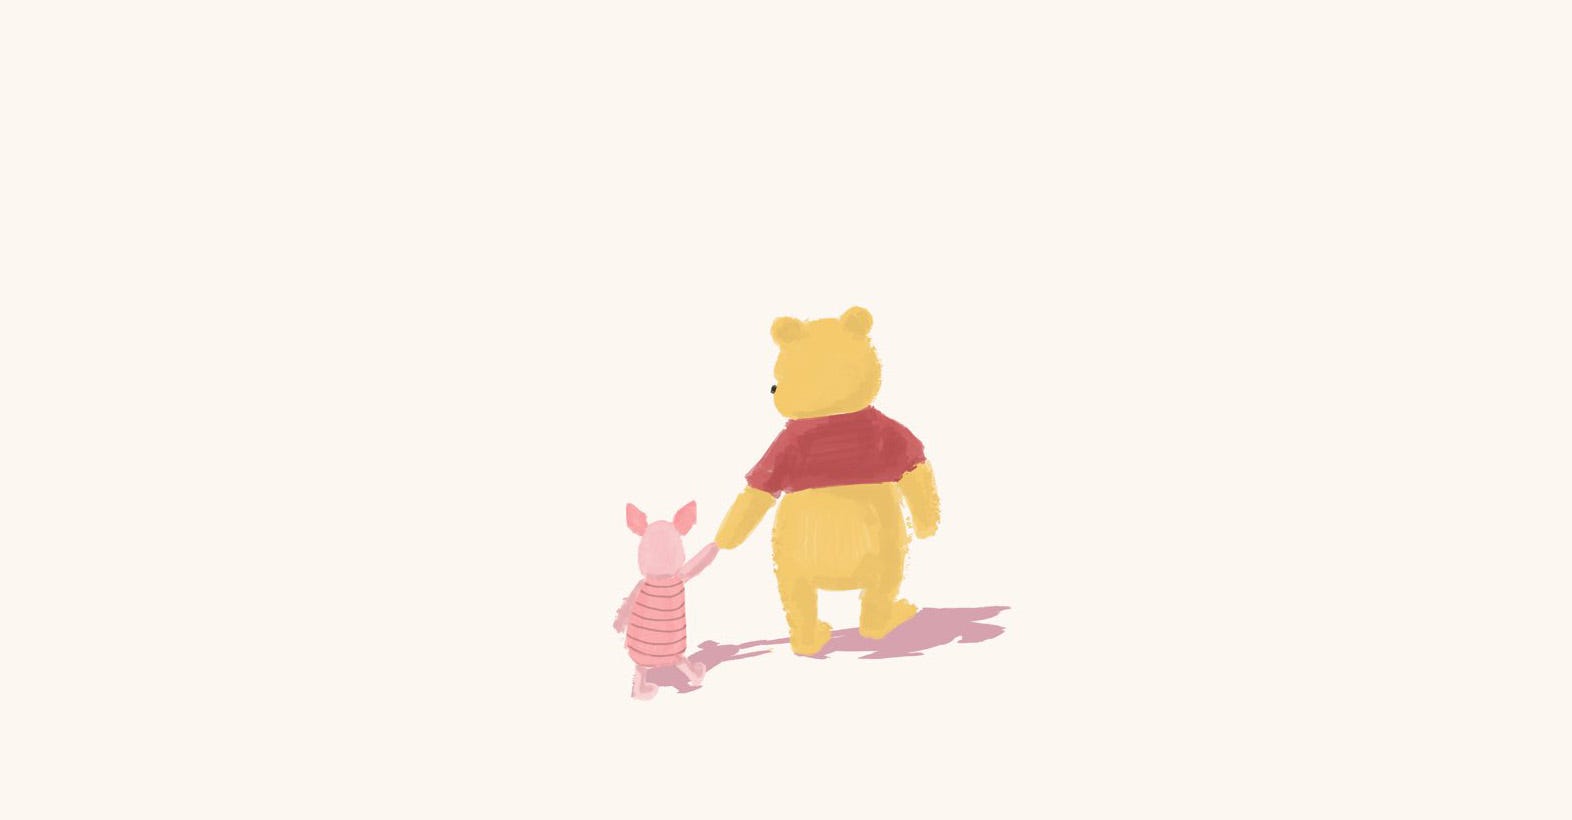 Winnie The Pooh Ai And Racism By Amos Wagon The Startup Jan 2021 Medium The Startup